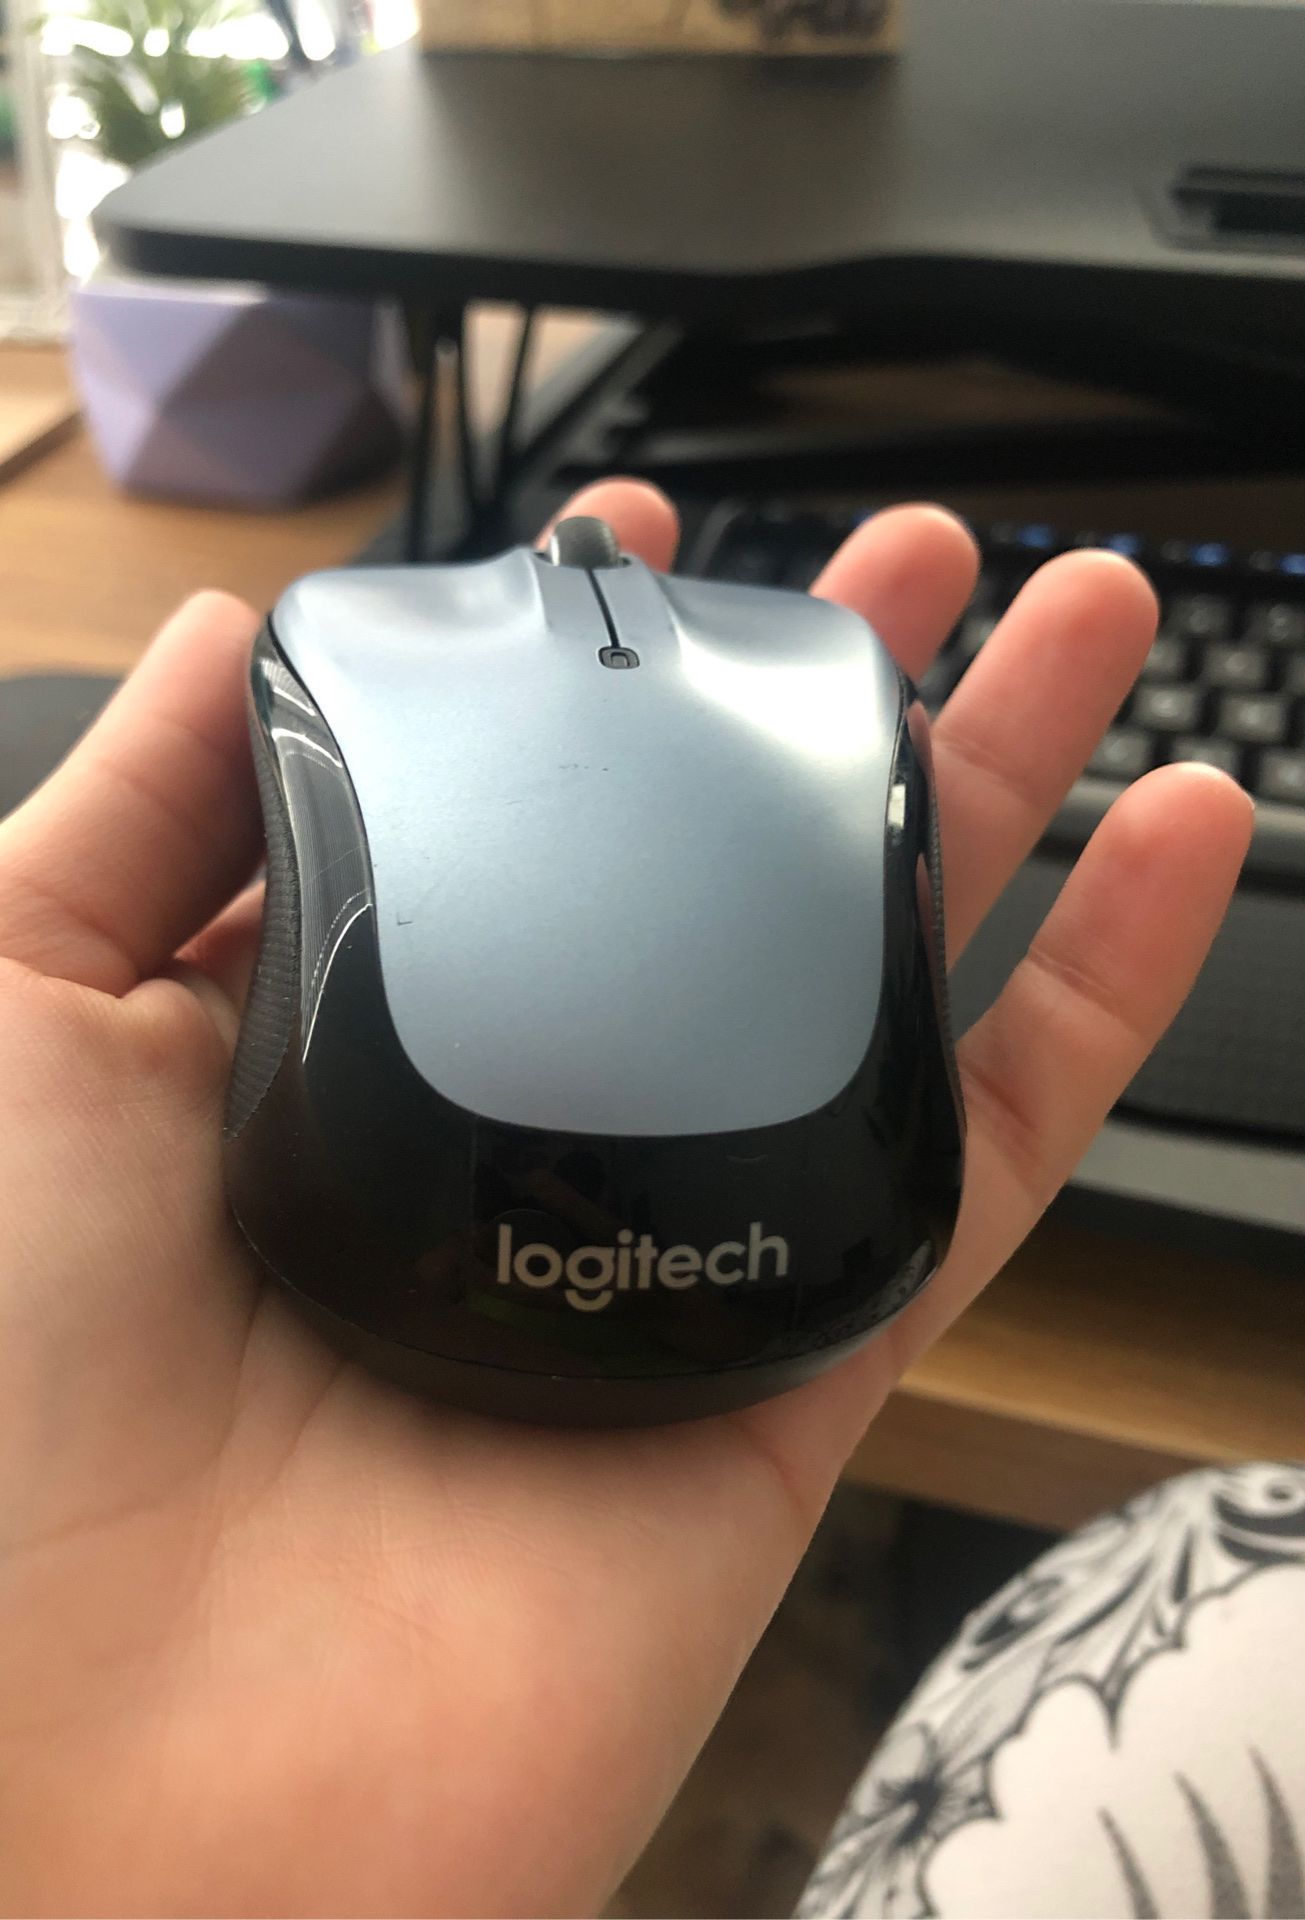 Laptop wireless mouse